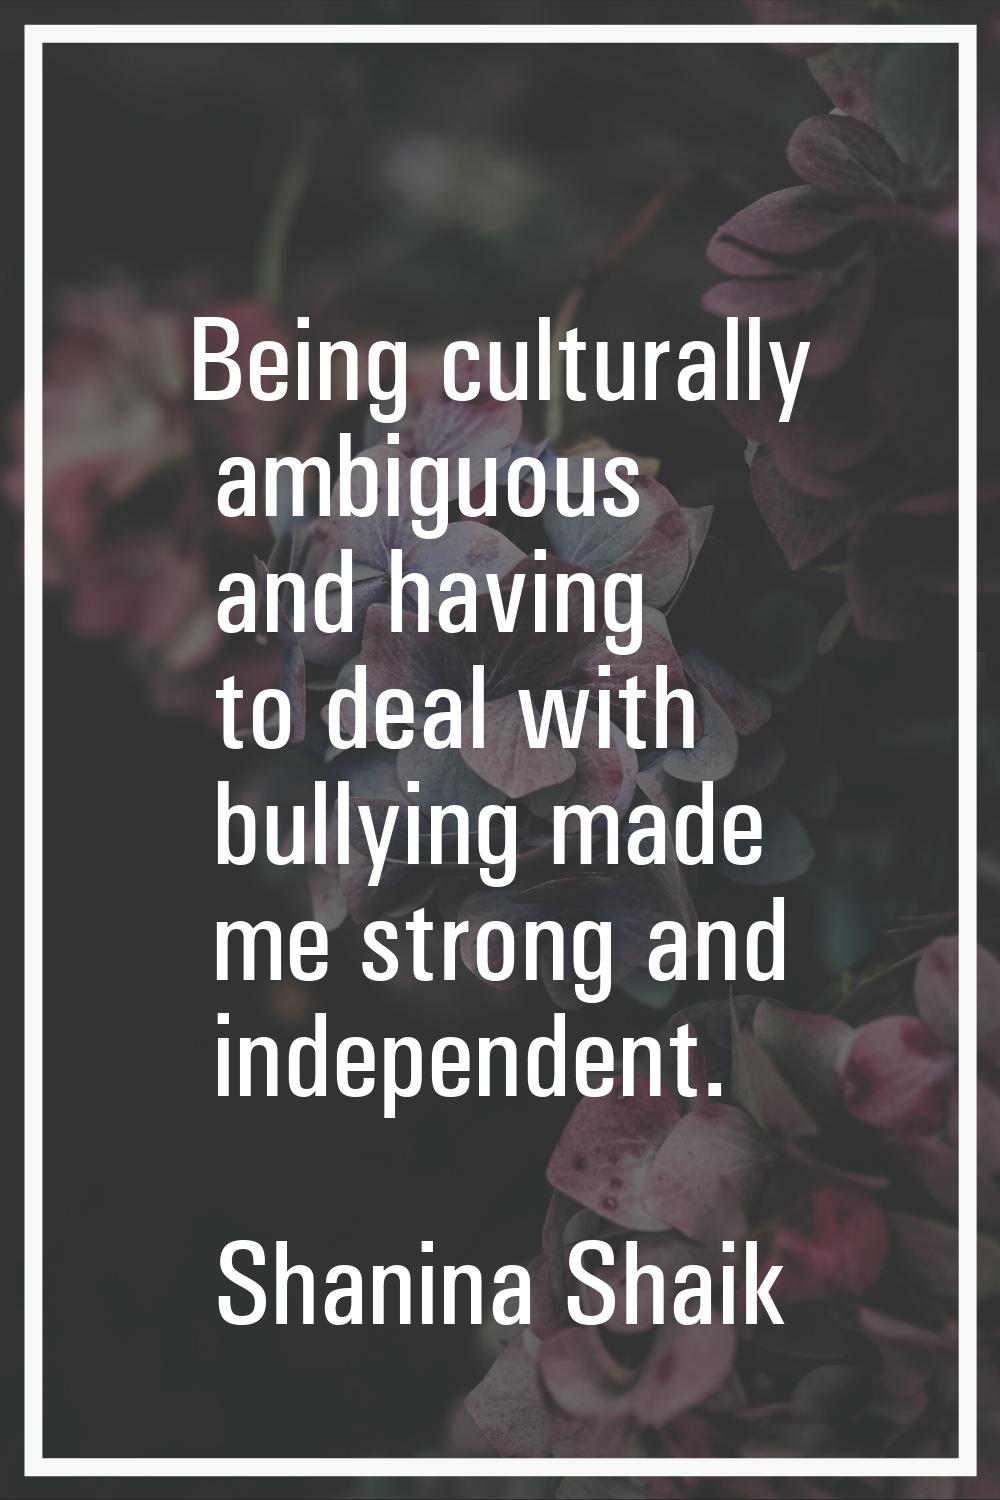 Being culturally ambiguous and having to deal with bullying made me strong and independent.